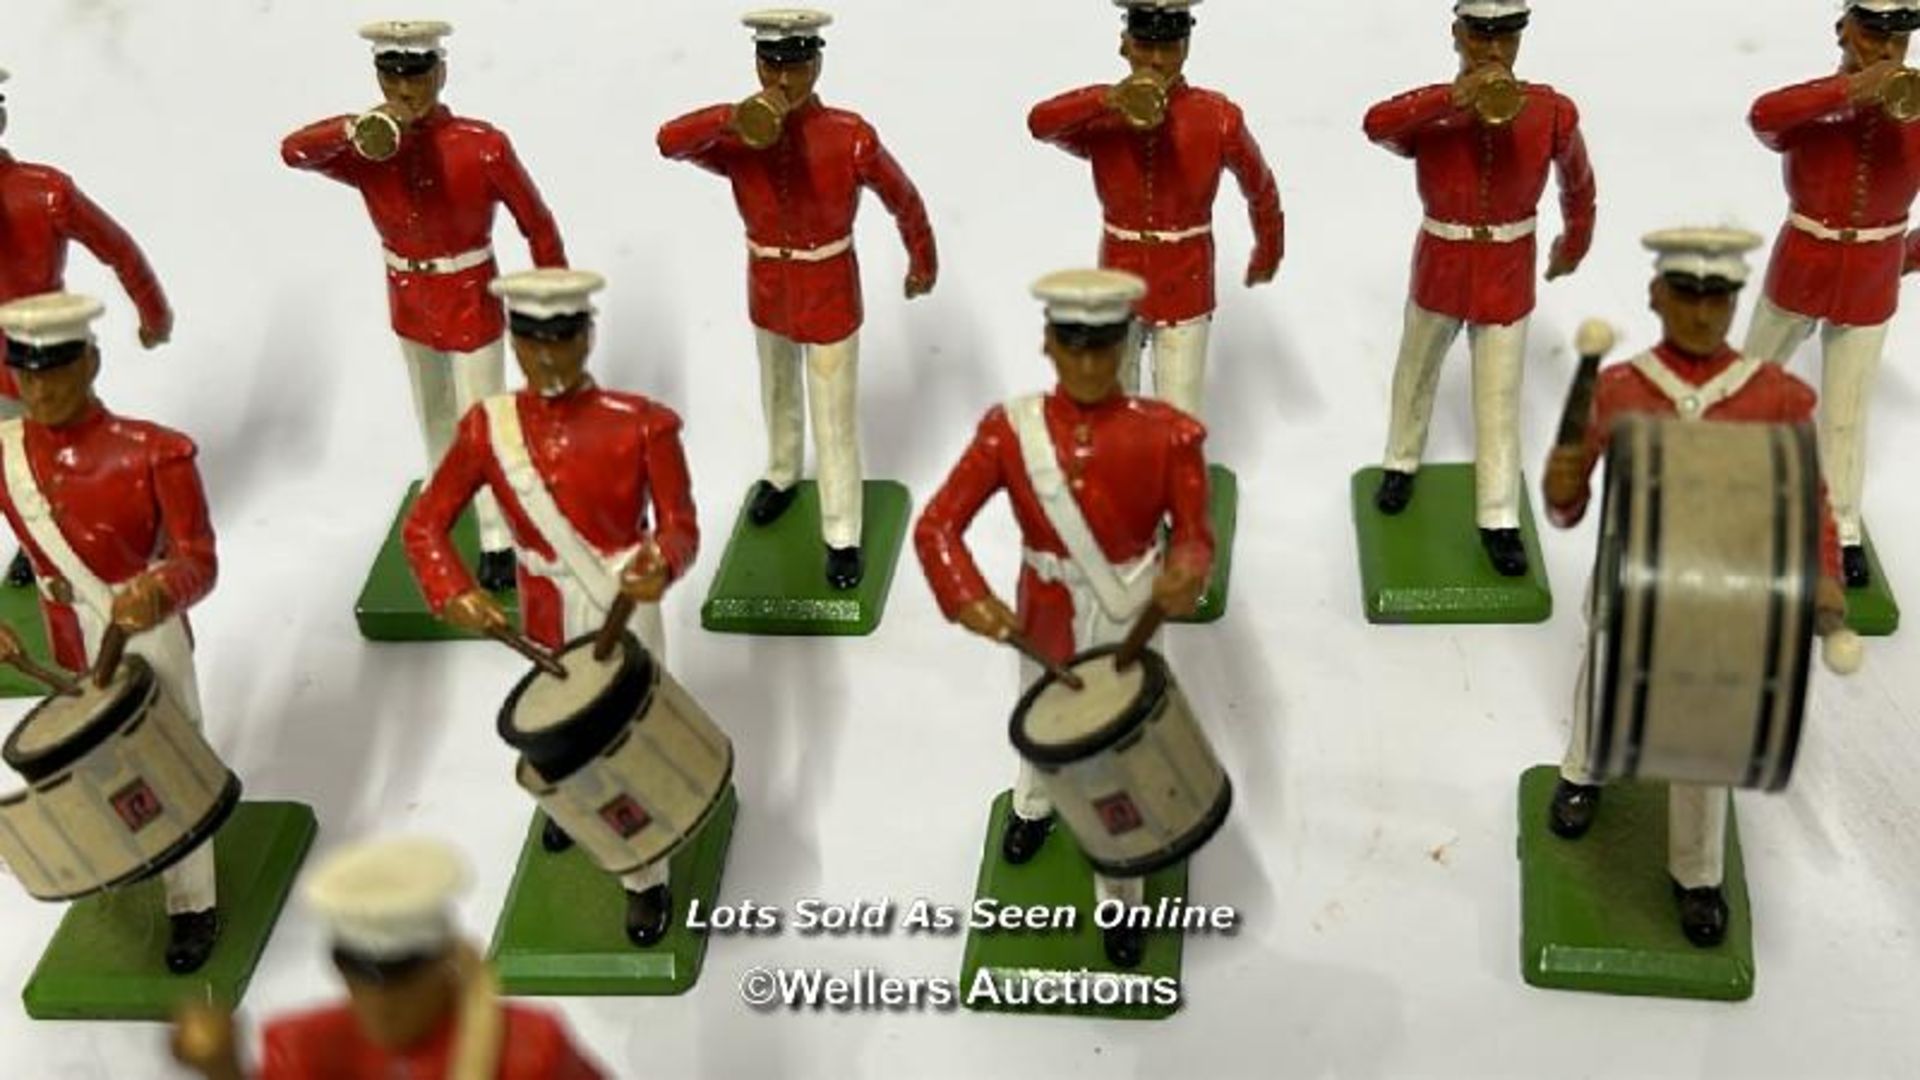 Britain's "Dorset U.S. Marine corps" marching band, sixteen figures, 1987 / AN5 - Image 3 of 8